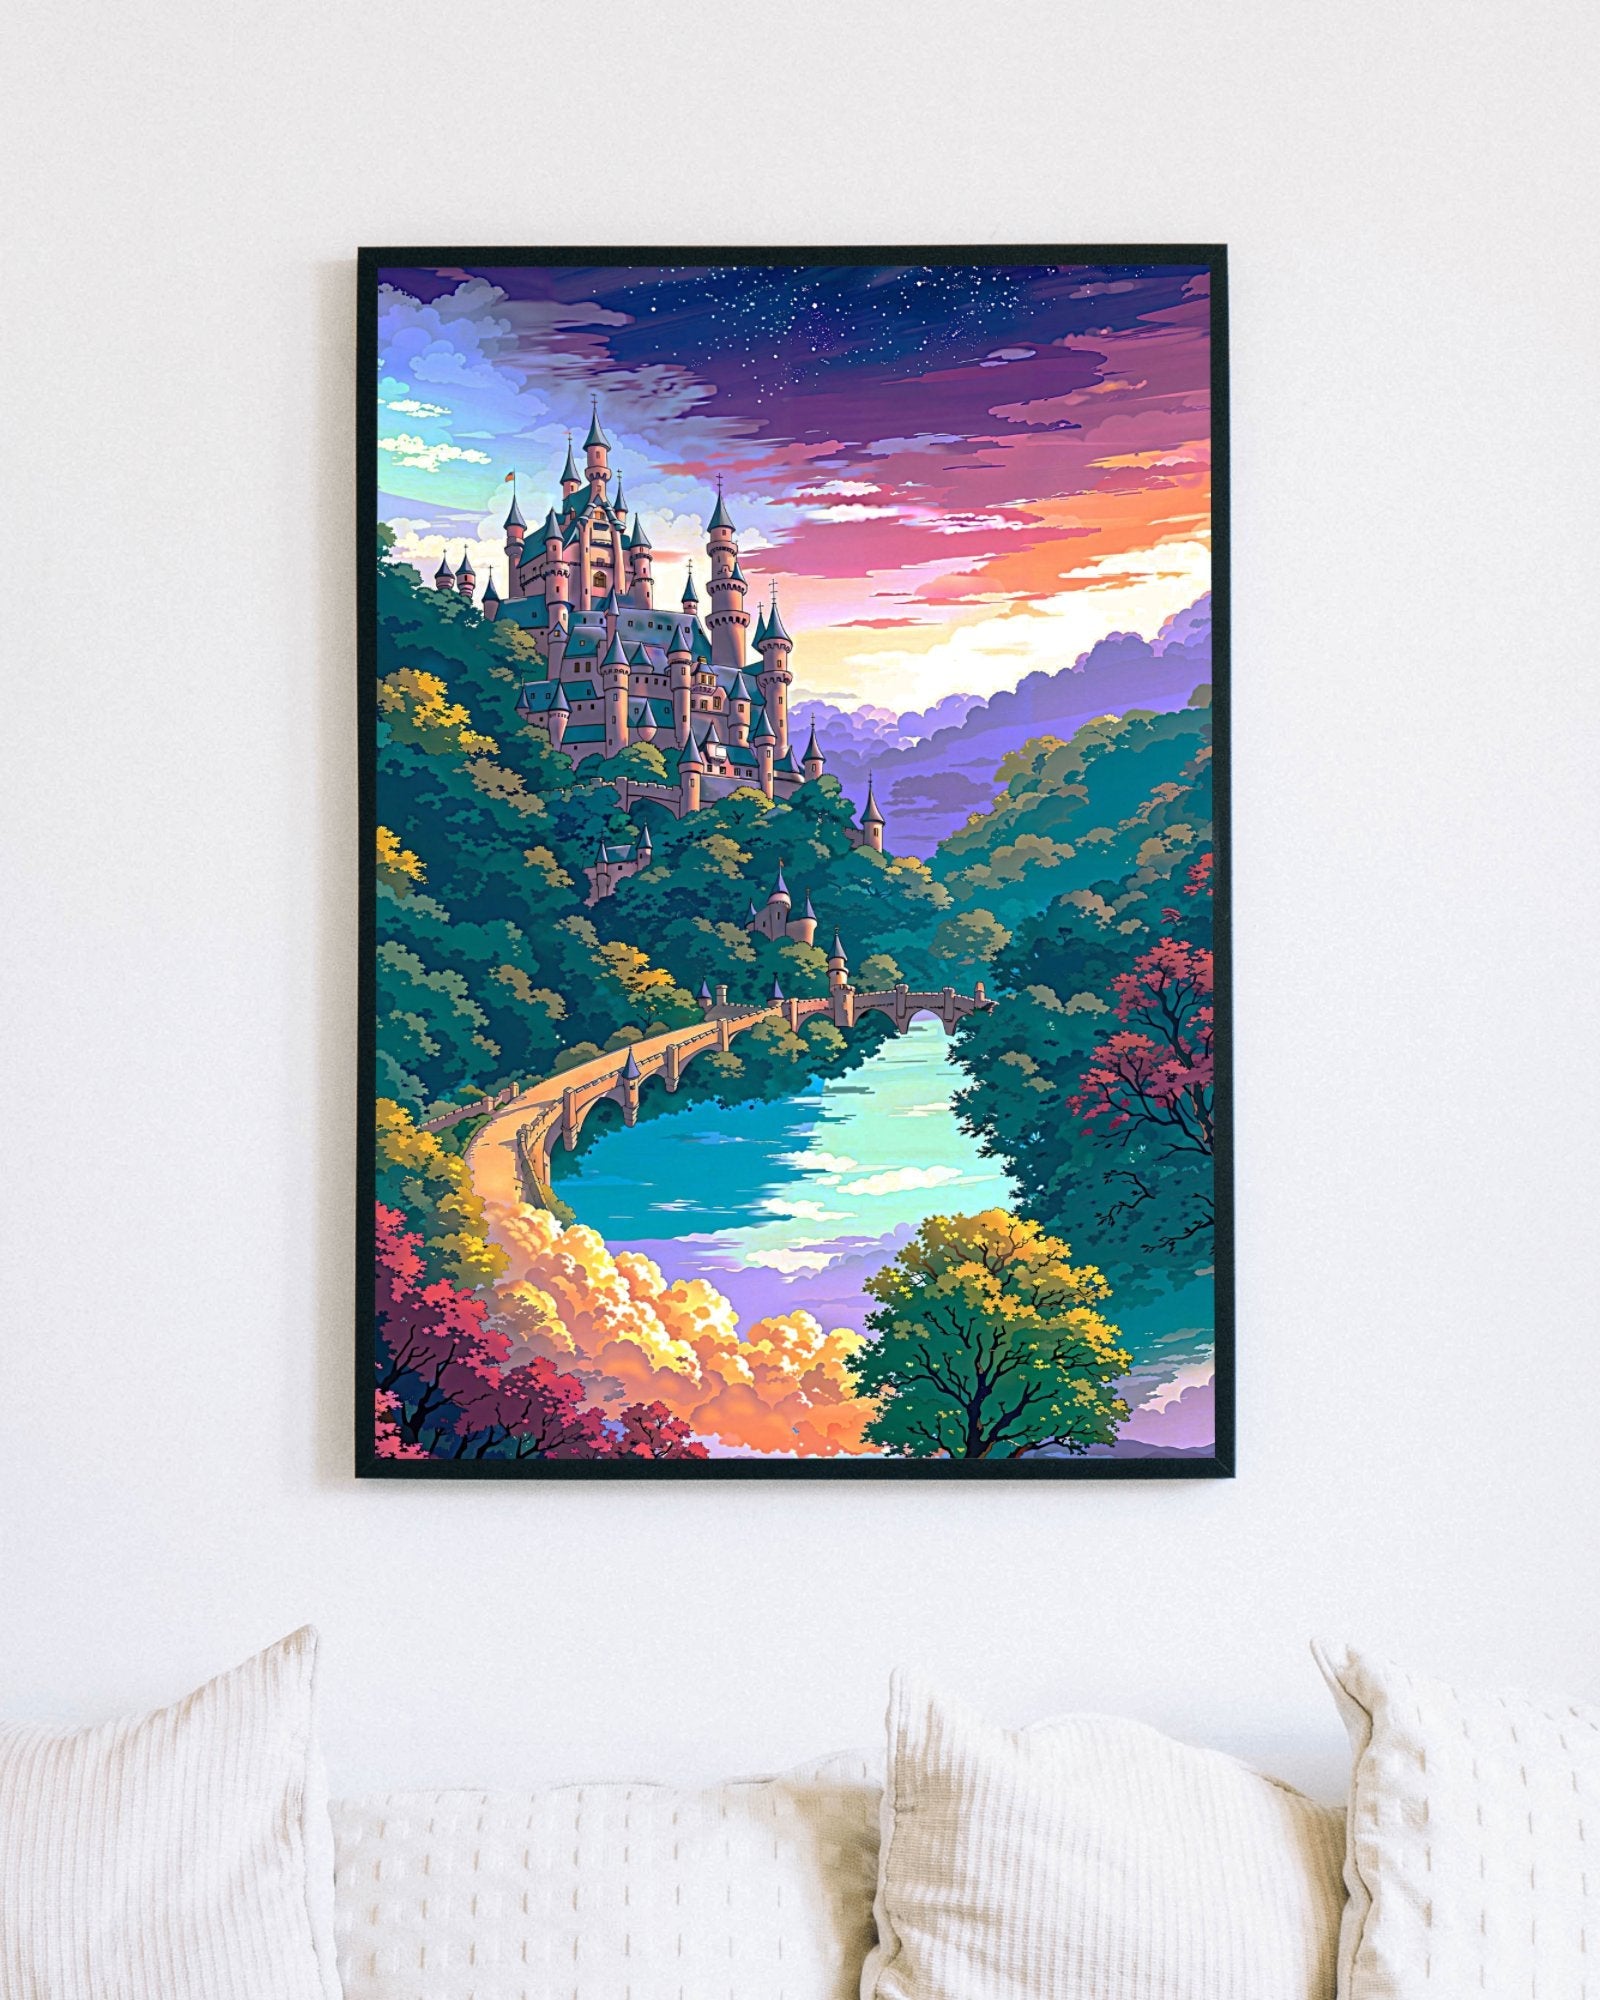 Autumn of infinite colors - Poster - Ever colorful